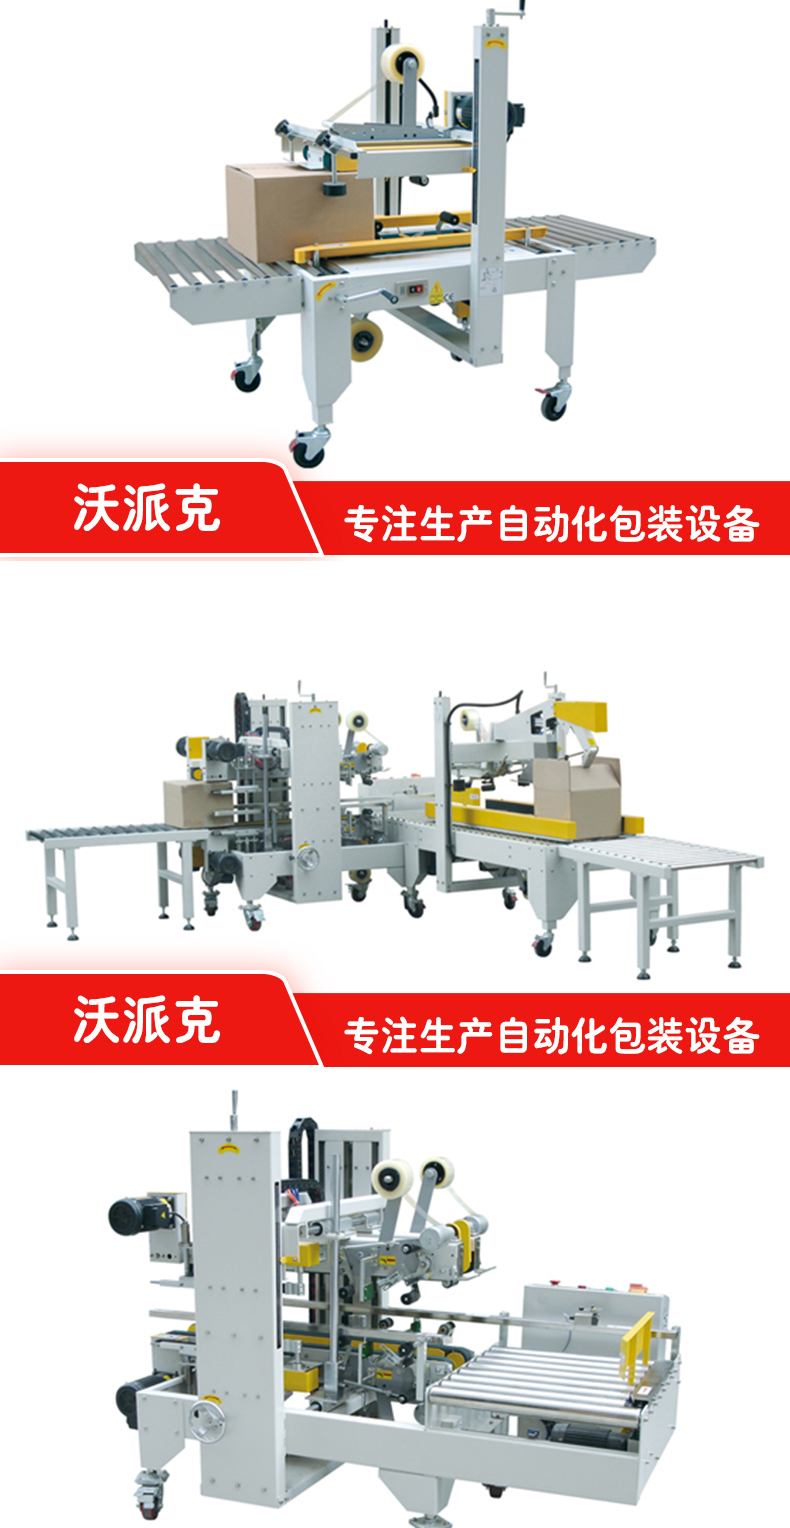 Up and down driven automatic sealing machine with tape, cardboard box sealing appliances, textile industry, stable operation